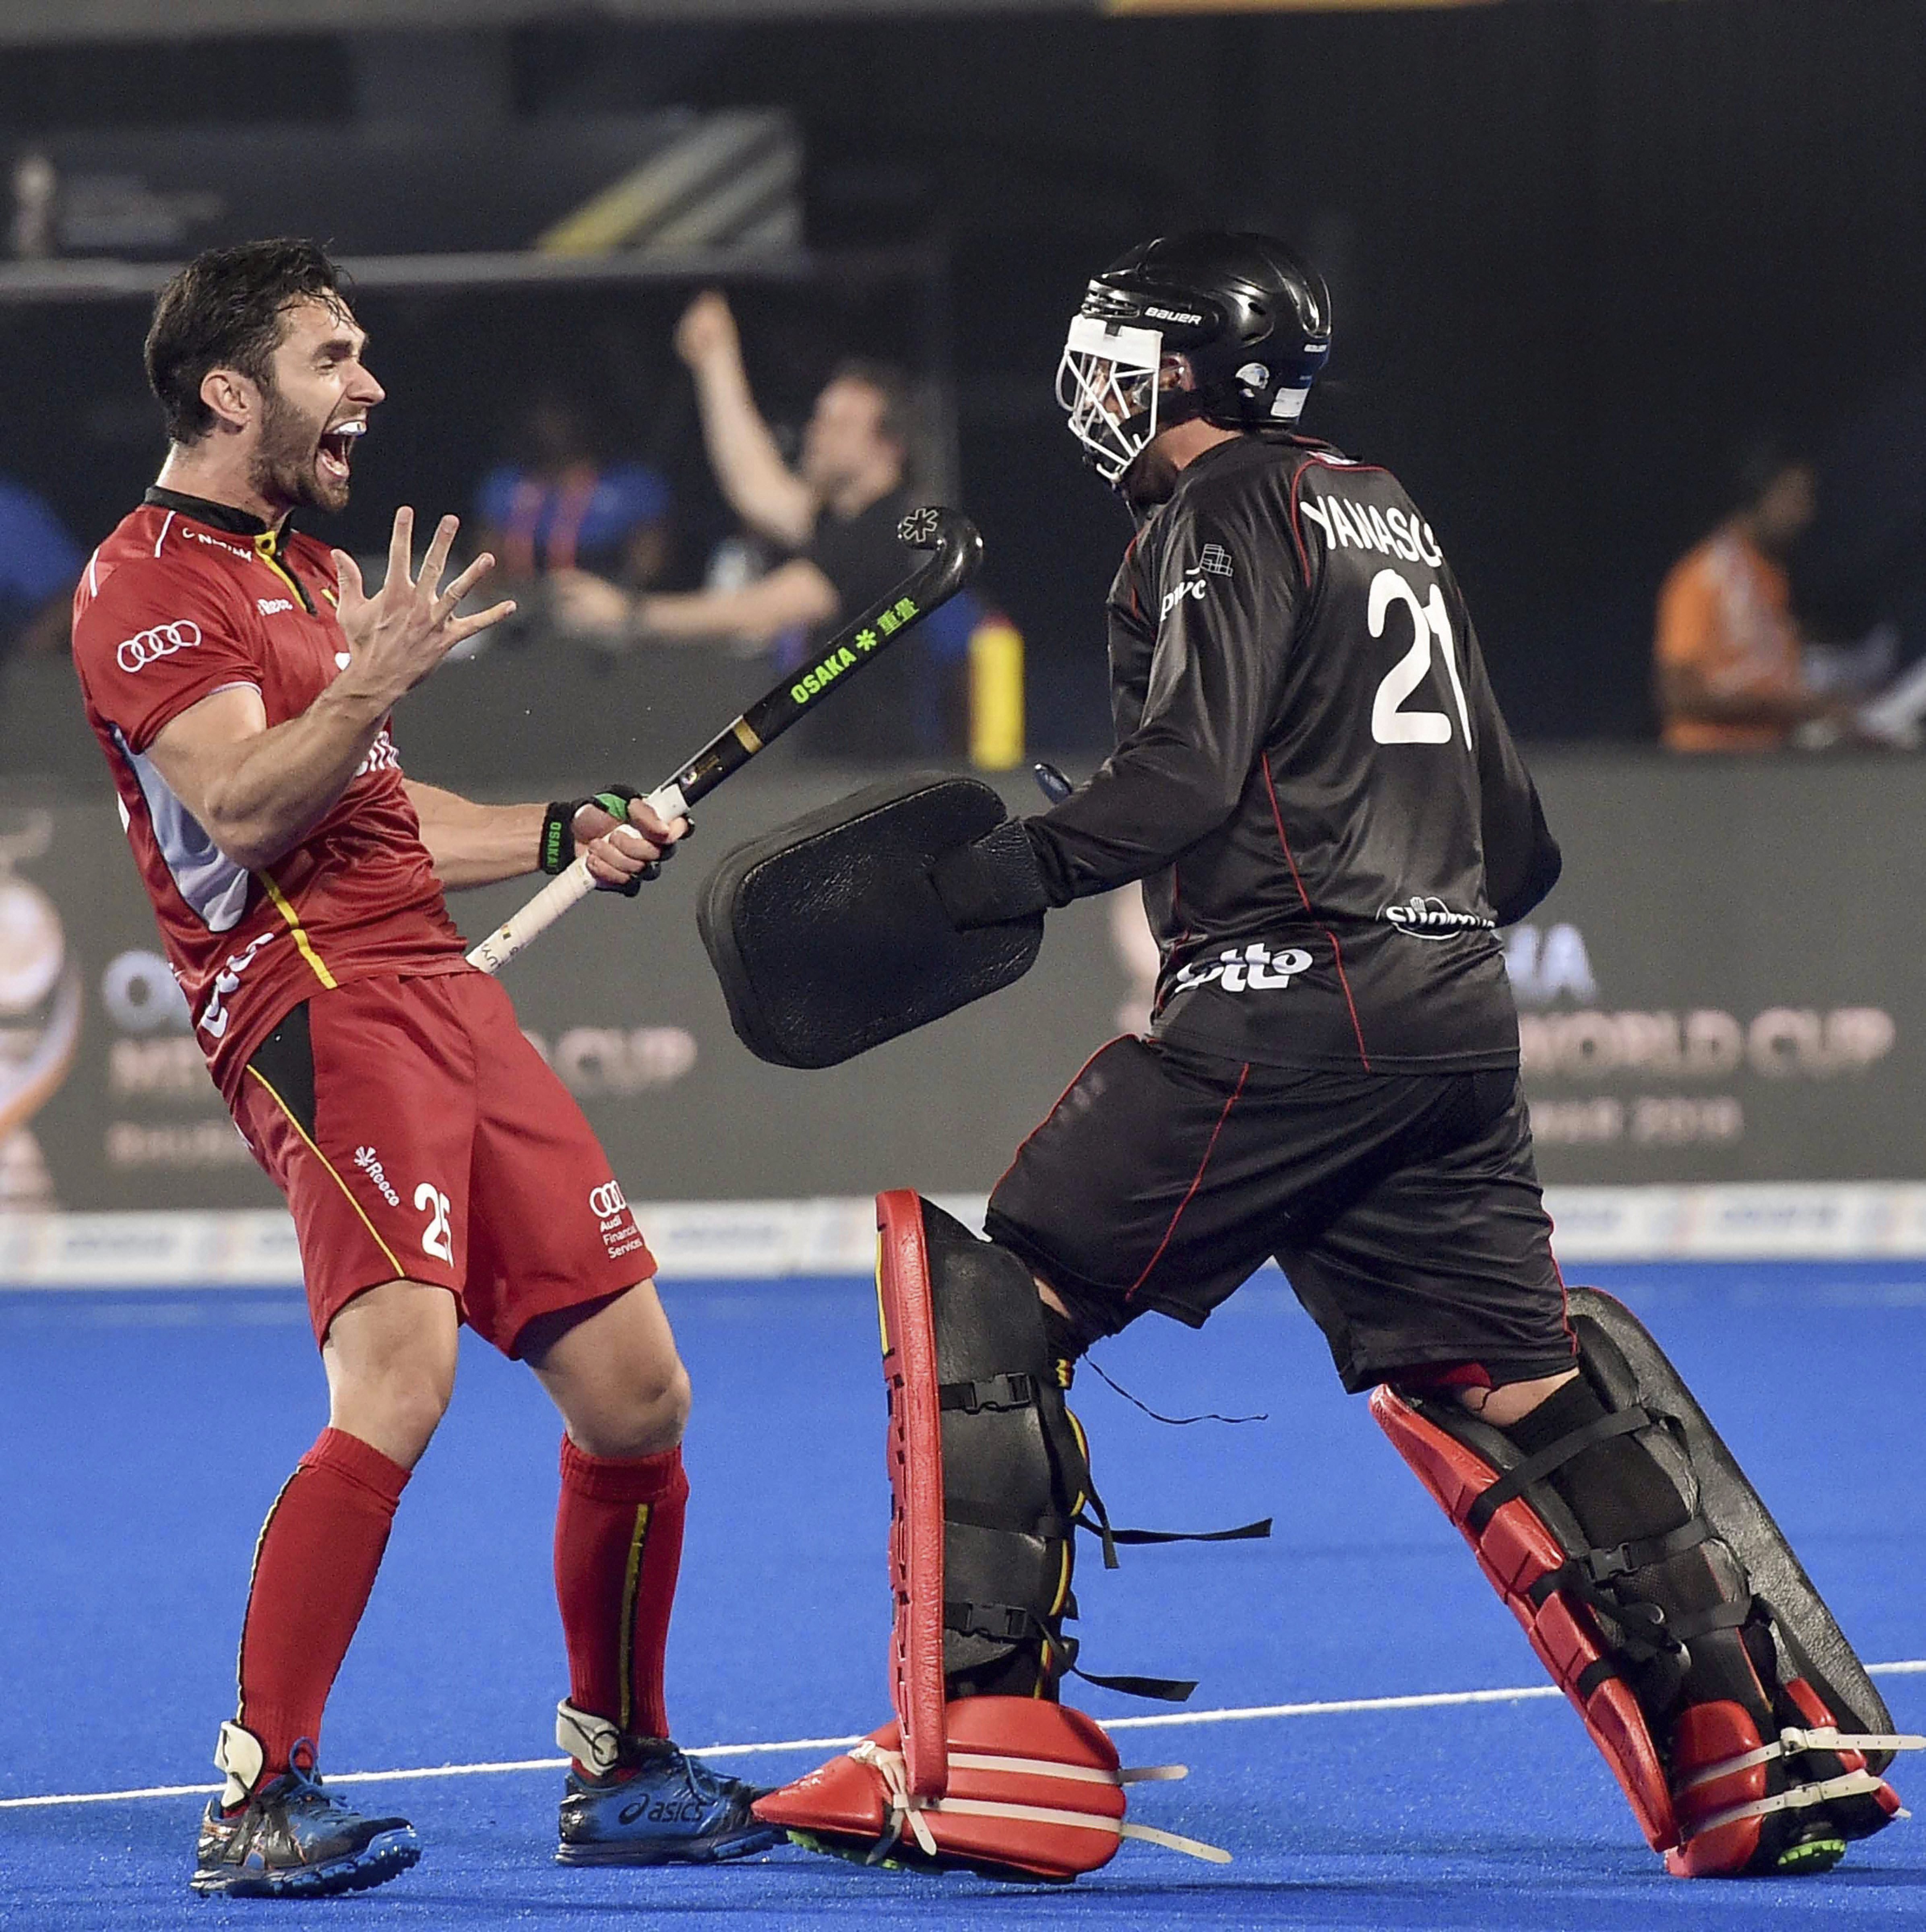 Belgium players GK Vincent Vanasch and Loick Luypaert celebrate after winning their match against Germany during their quarterfinal match, at the Men's Hockey World Cup 2018, in Bhubaneswar - PTI